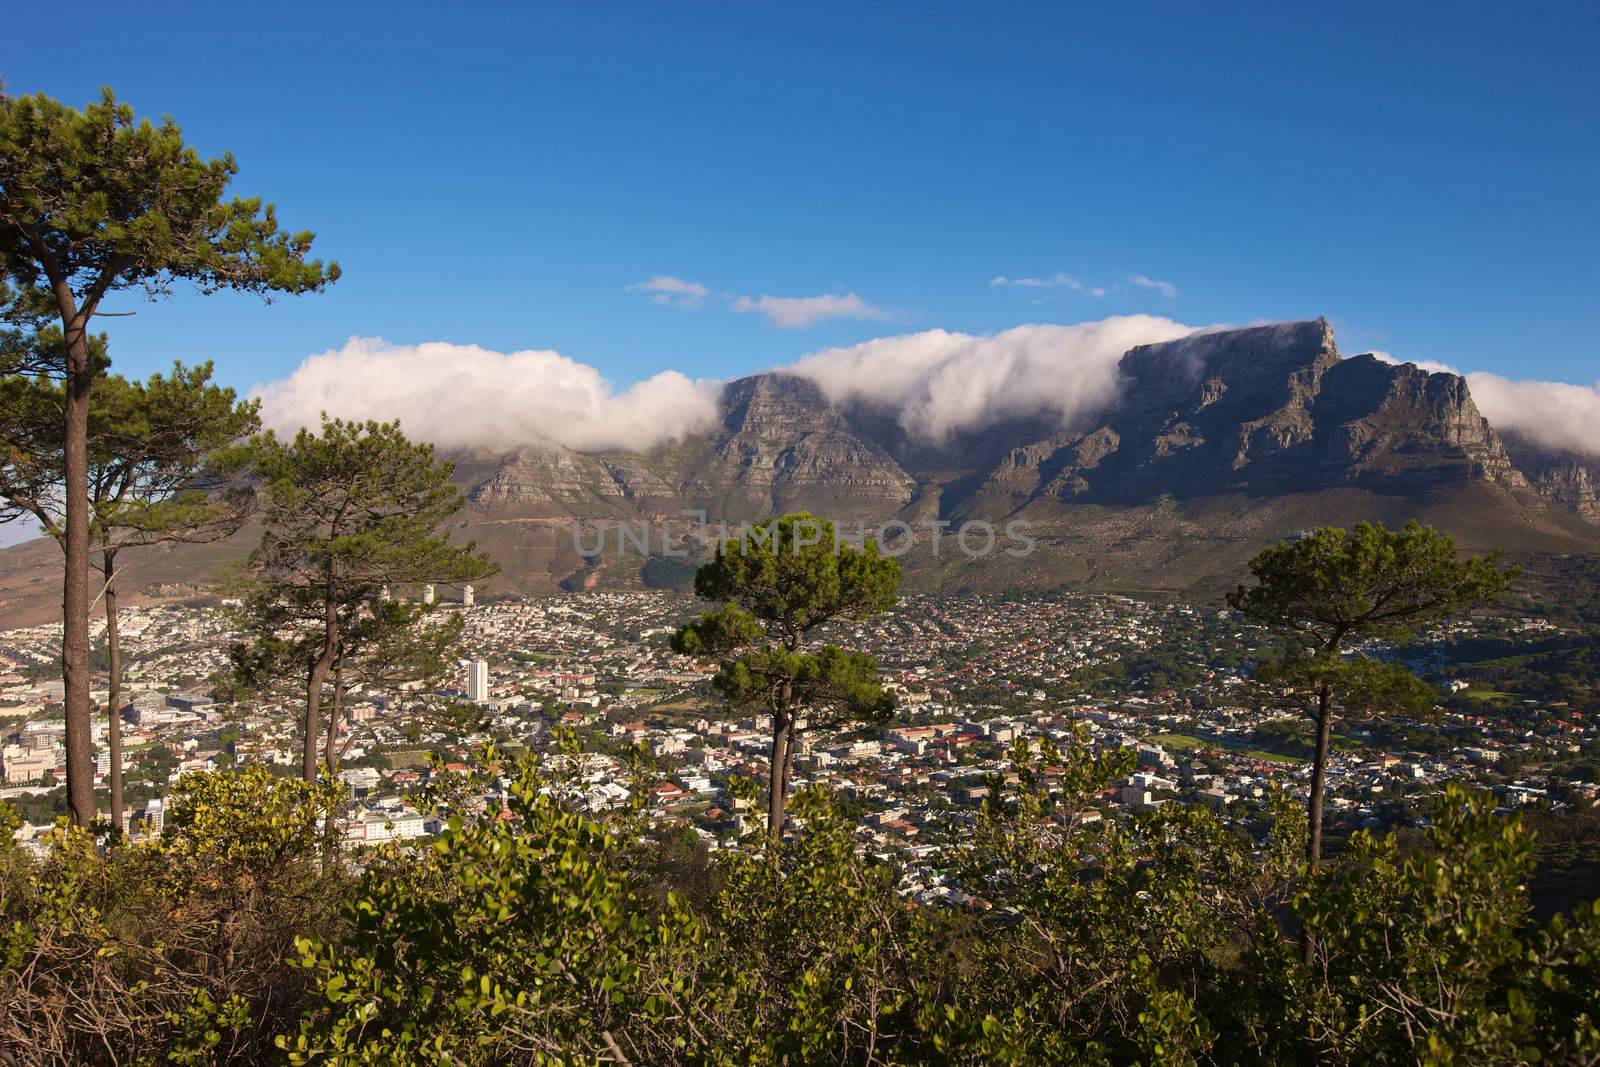 Clouds over Table Mountain by johanelzenga